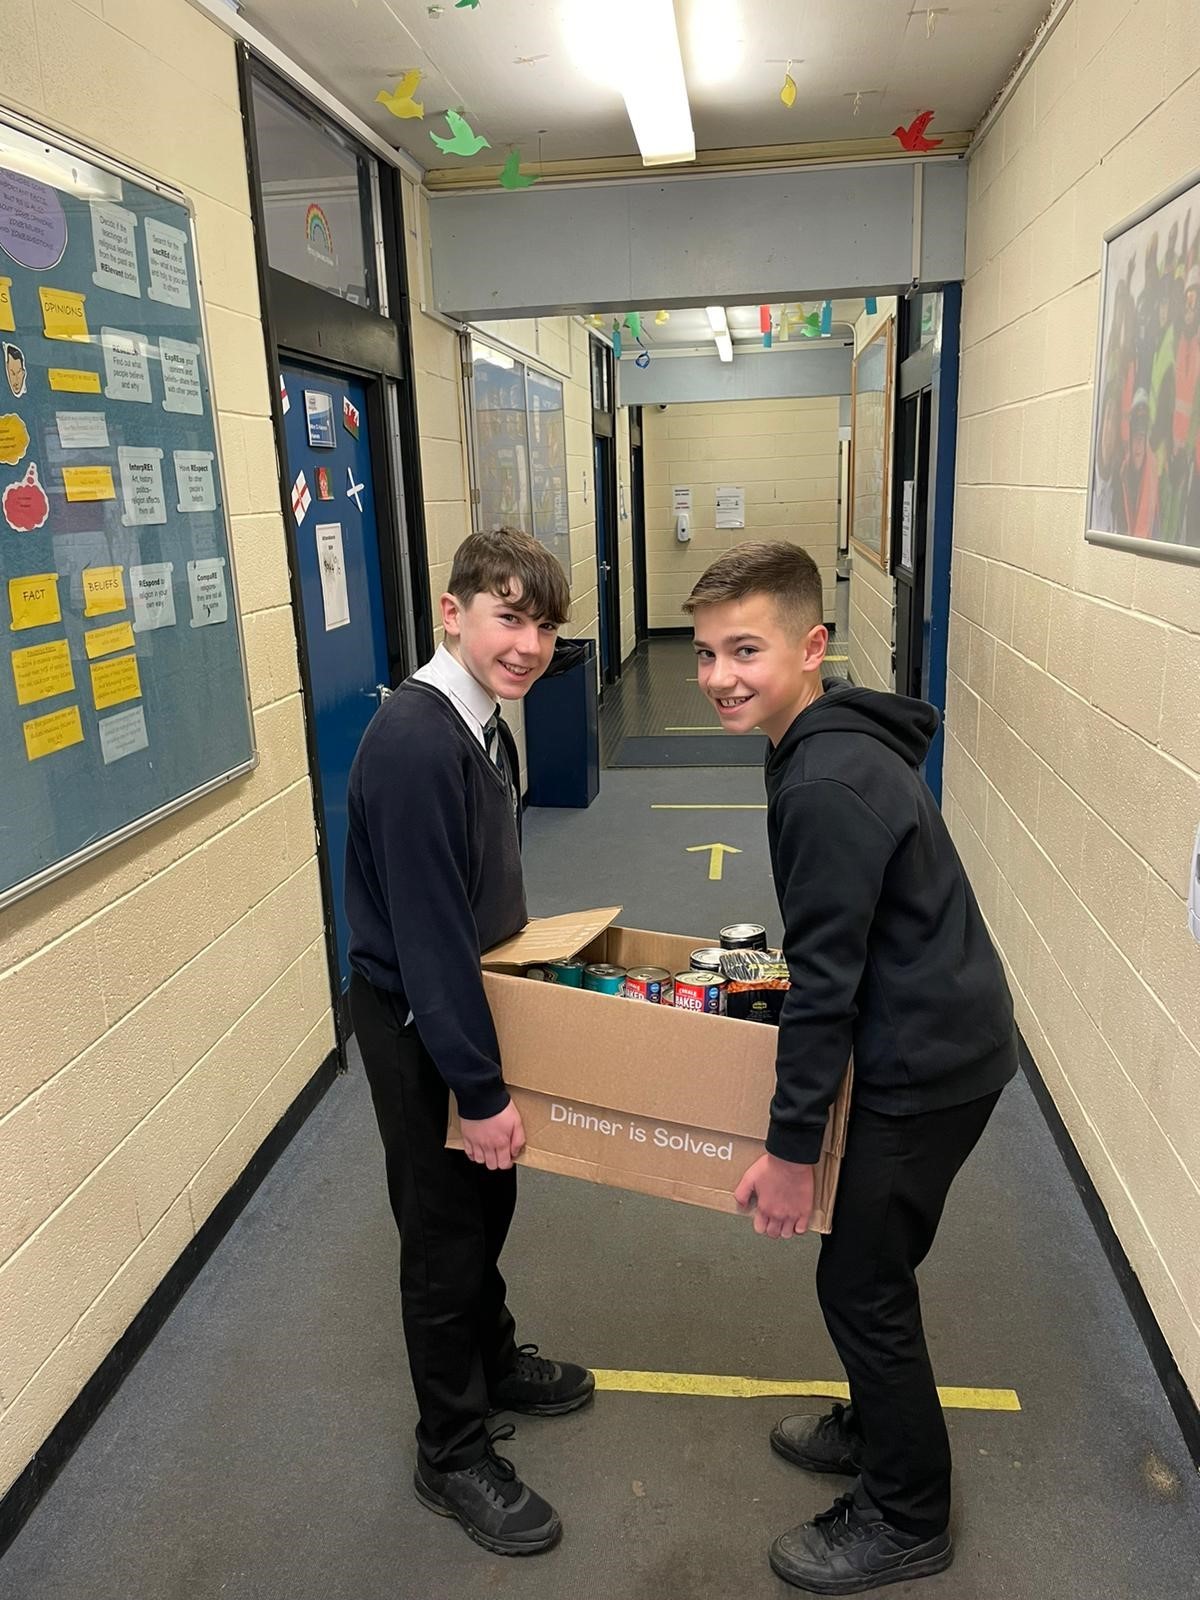 On collection day, Ben Charnley and Tom Wright help get the donated items ready to be loaded onto the Foodbank van.